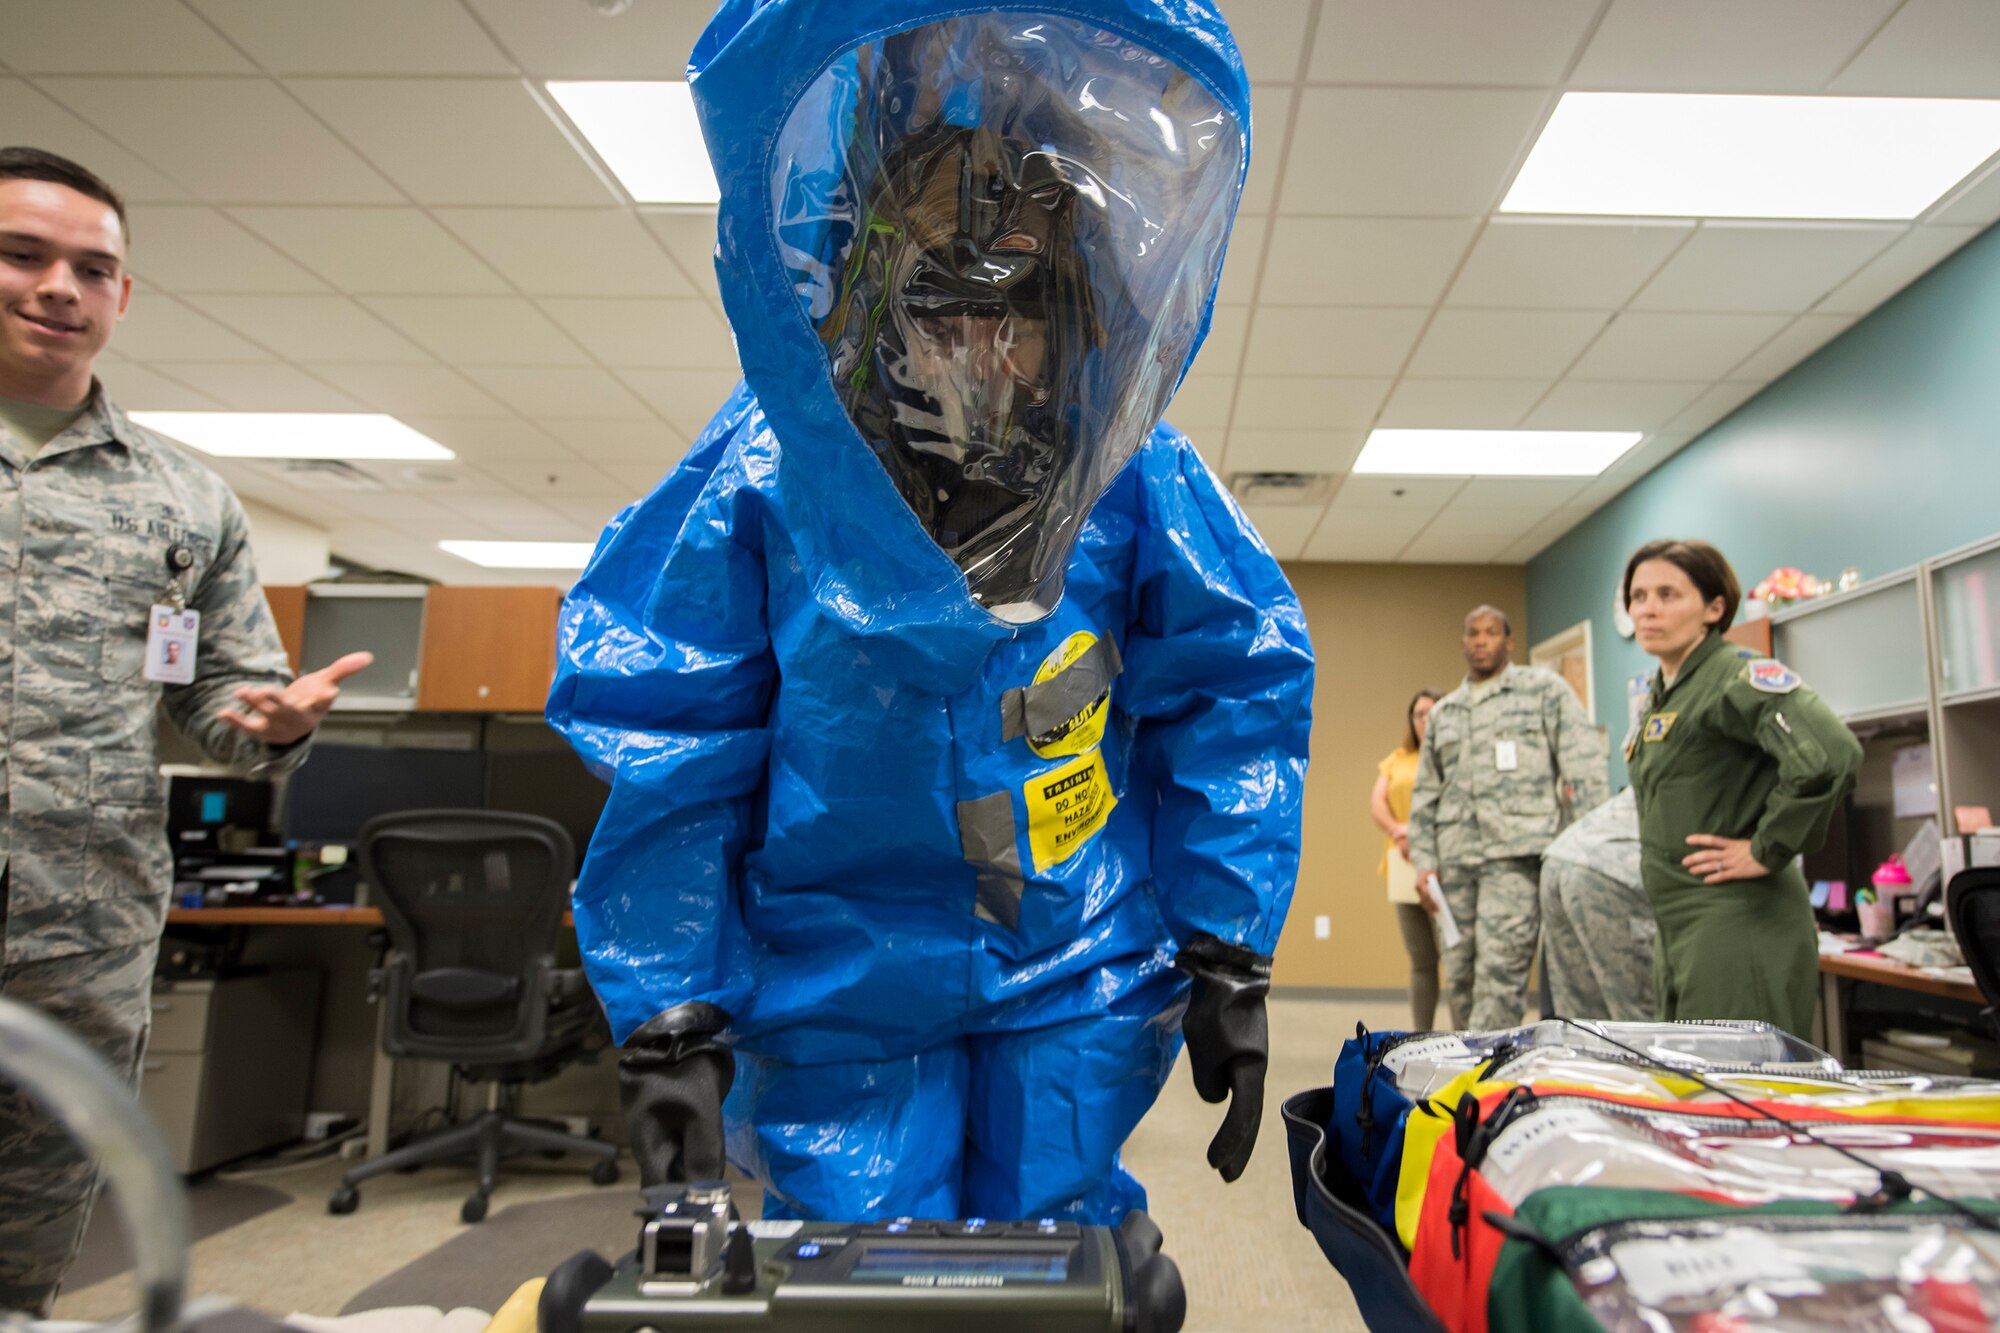 Col. Jennifer Short, center, 23 Wing commander, inspects a specimen while wearing a Level A suit, April 30, 2018, at Moody Air Force Base, Ga. Short toured the 23d Medical Group (MDG) to gain a better understanding of their overall mission, capabilities, and comprehensive duties, and was able to experience the day-to-day operations of the various units within the 23d MDG, ranging from bioenvironmental to ambulatory care. (U.S. Air Force photo by Airman 1st Class Eugene Oliver)